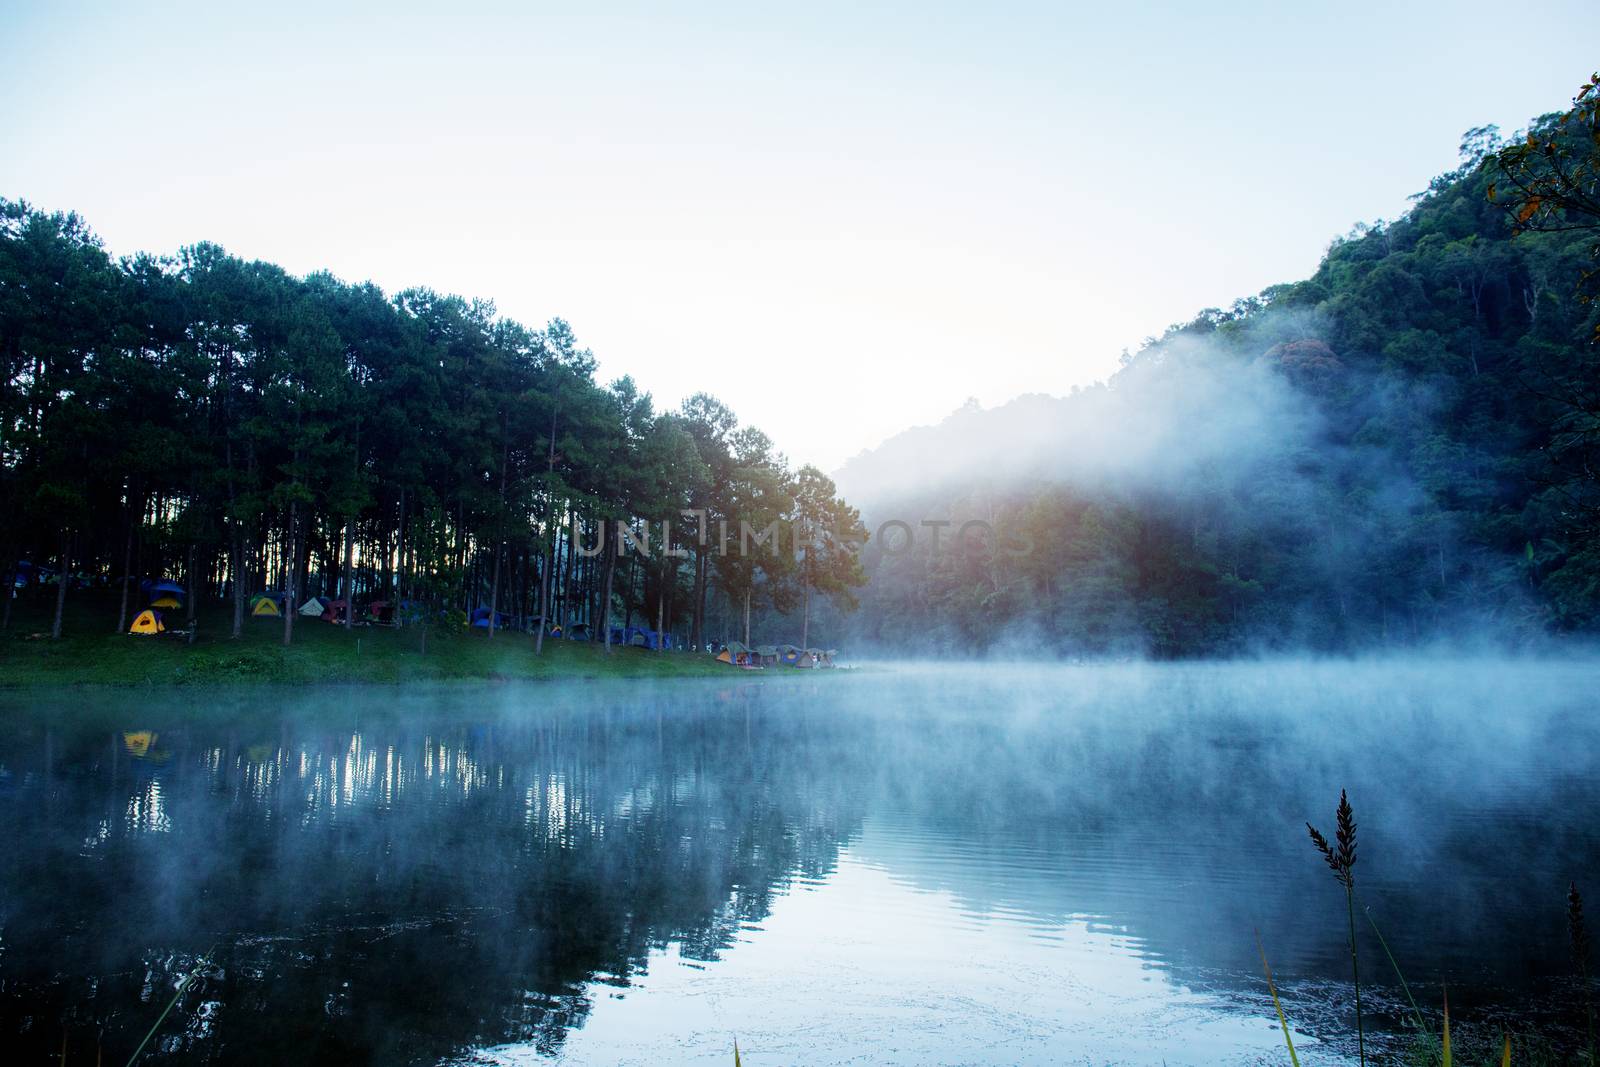 Pang oung reservoir with fog. by start08